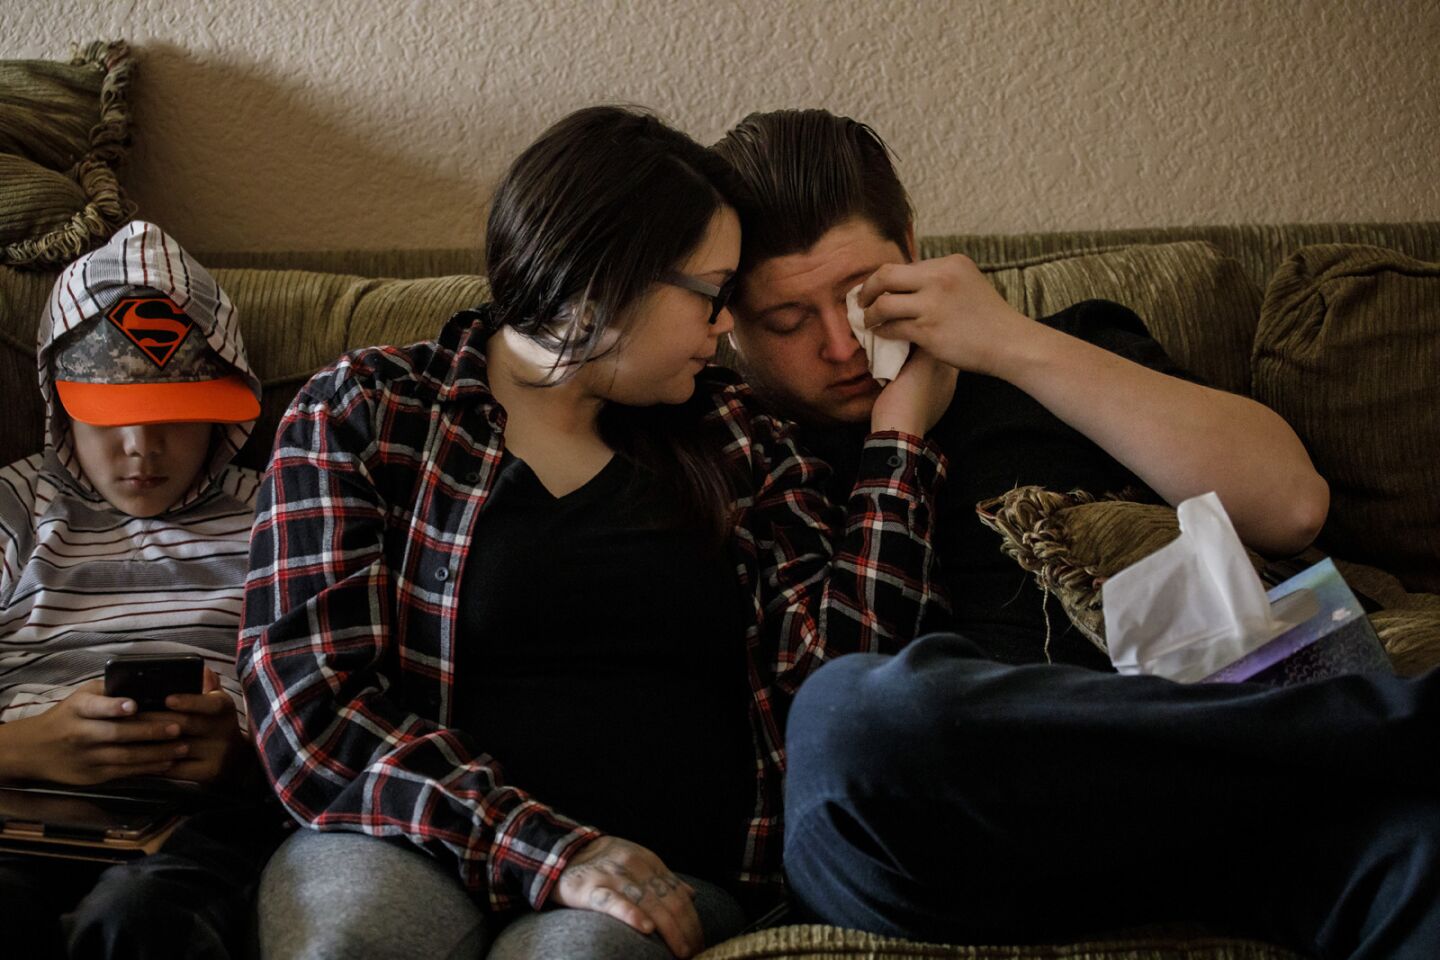 Alexandria Wilson, 21, consoles her boyfriend, Jacob Golden, 25, as they recount their harrowing escape from the Camp Fire at a relative's house in Applegate, Calif.